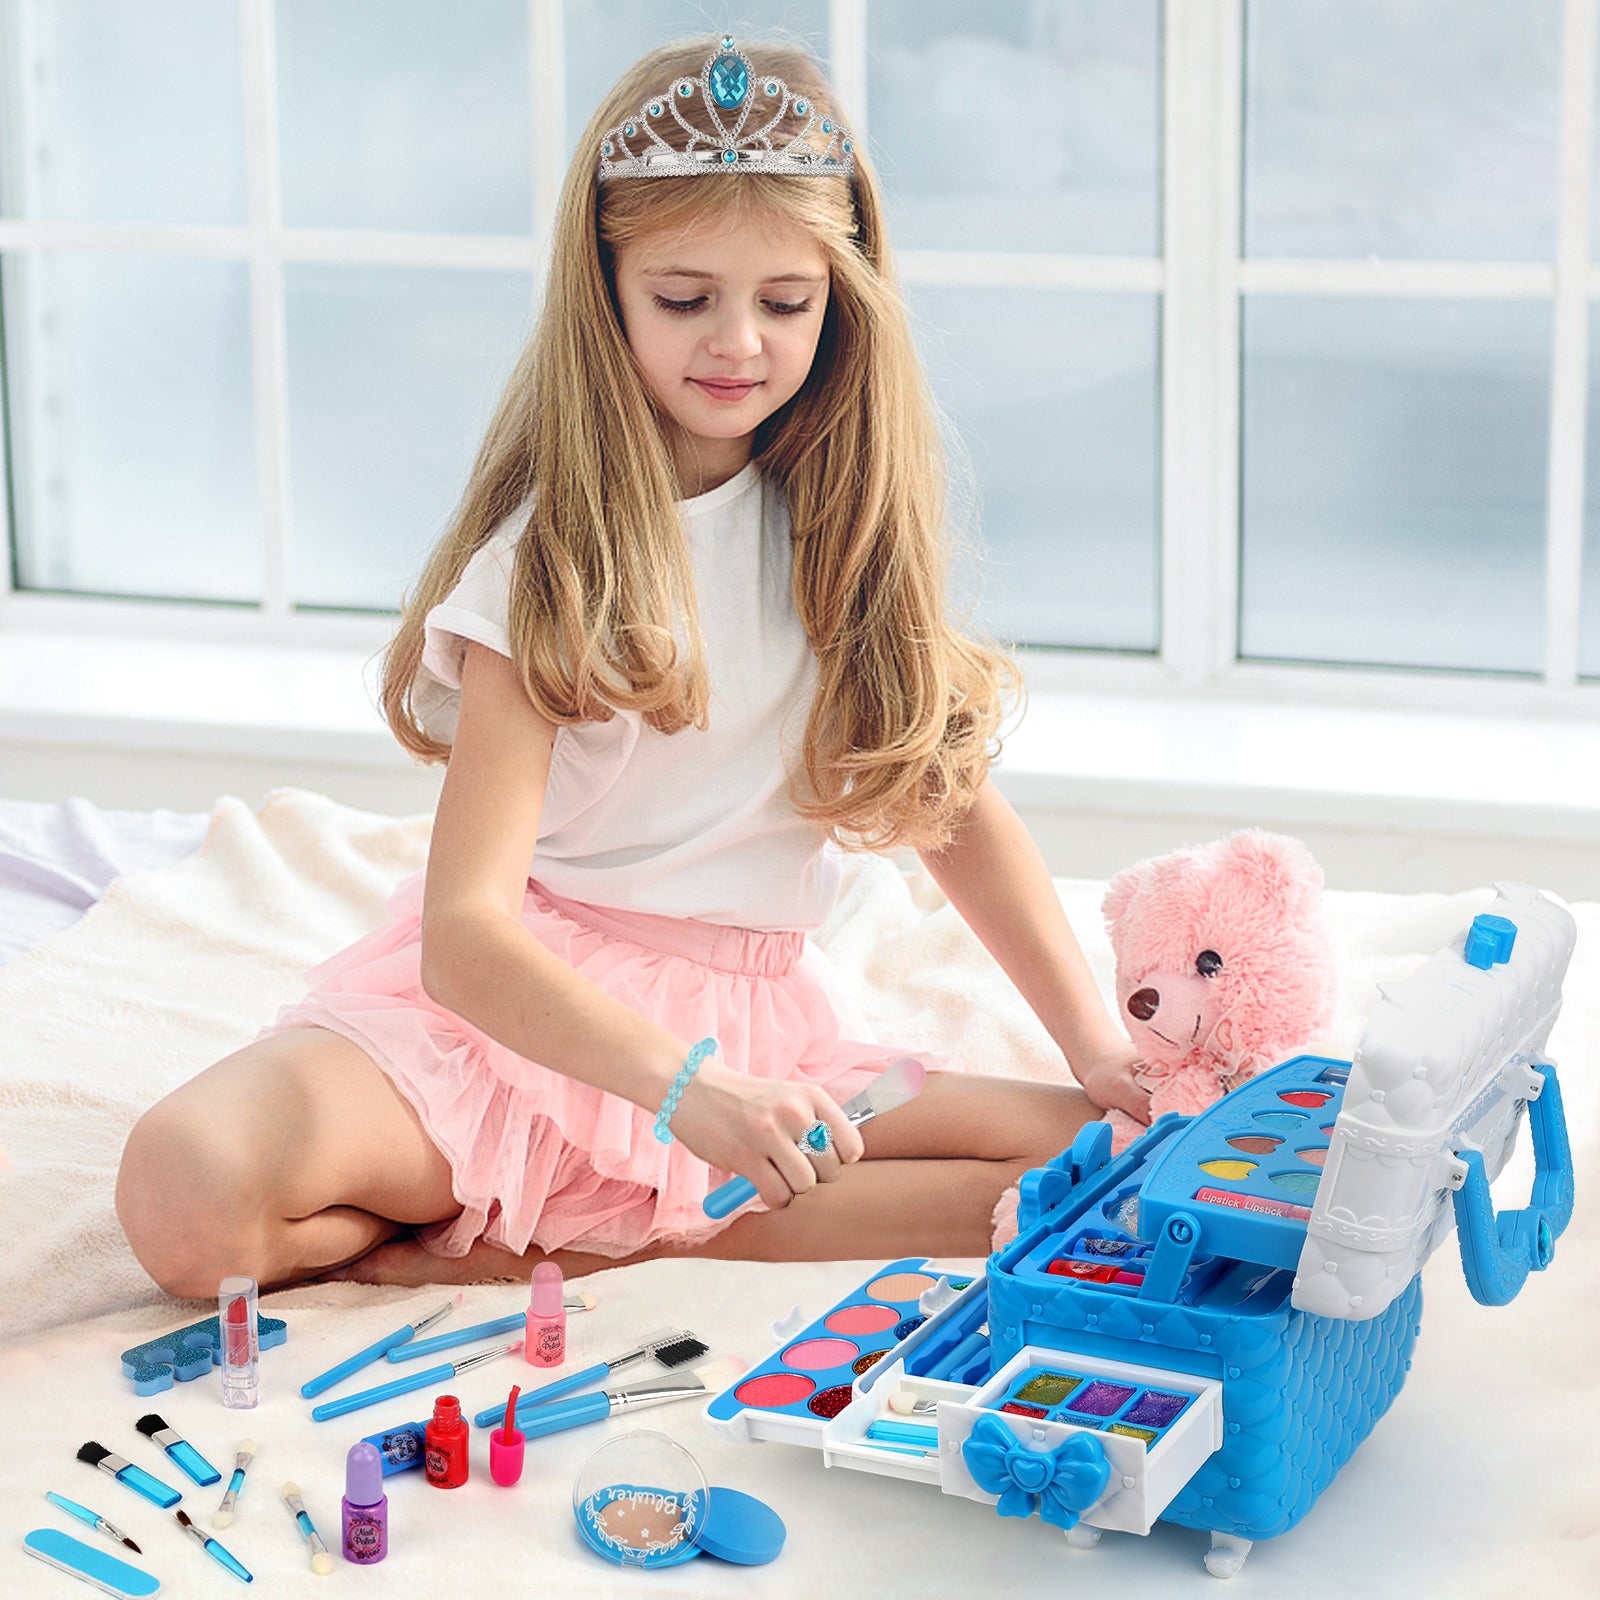 Girls Toys for Kids 12 Years & Up in Toys for Kids 12 Years & Up 